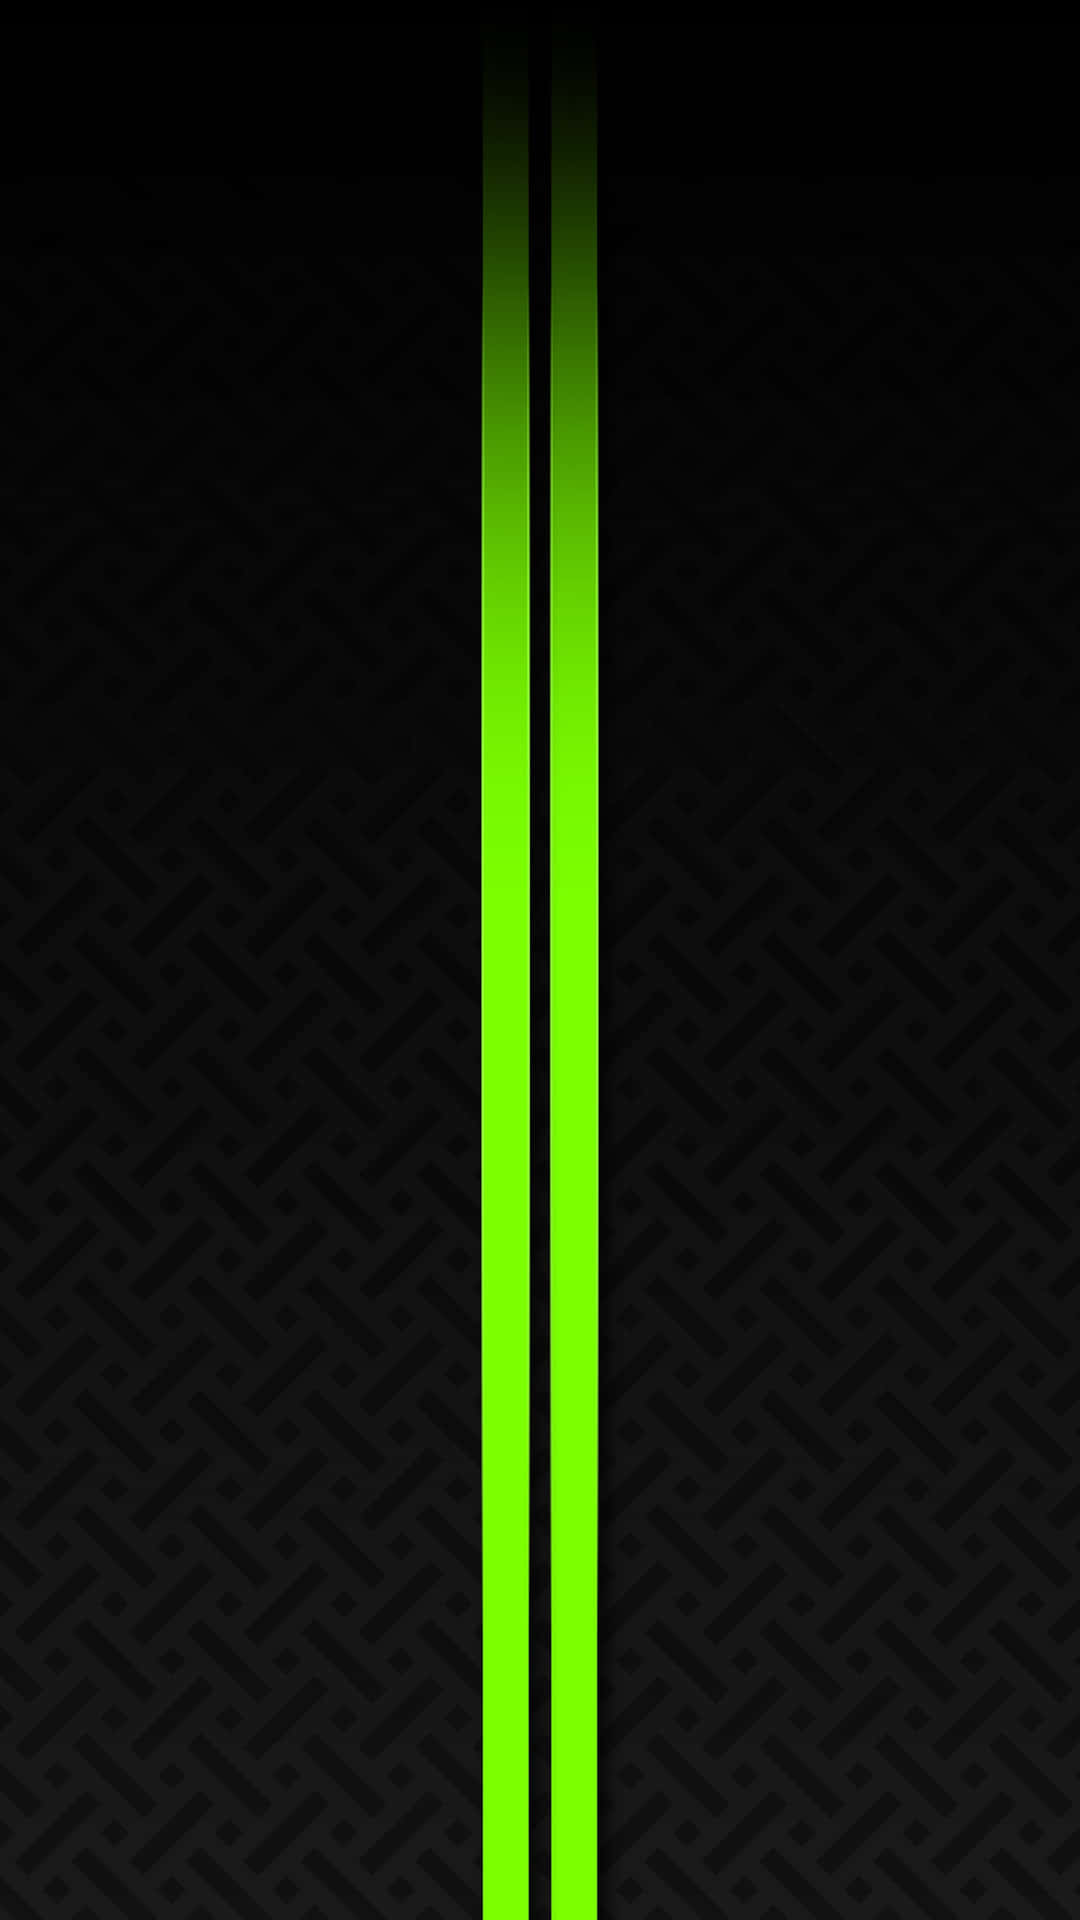 A Green Neon Line On A Black Background